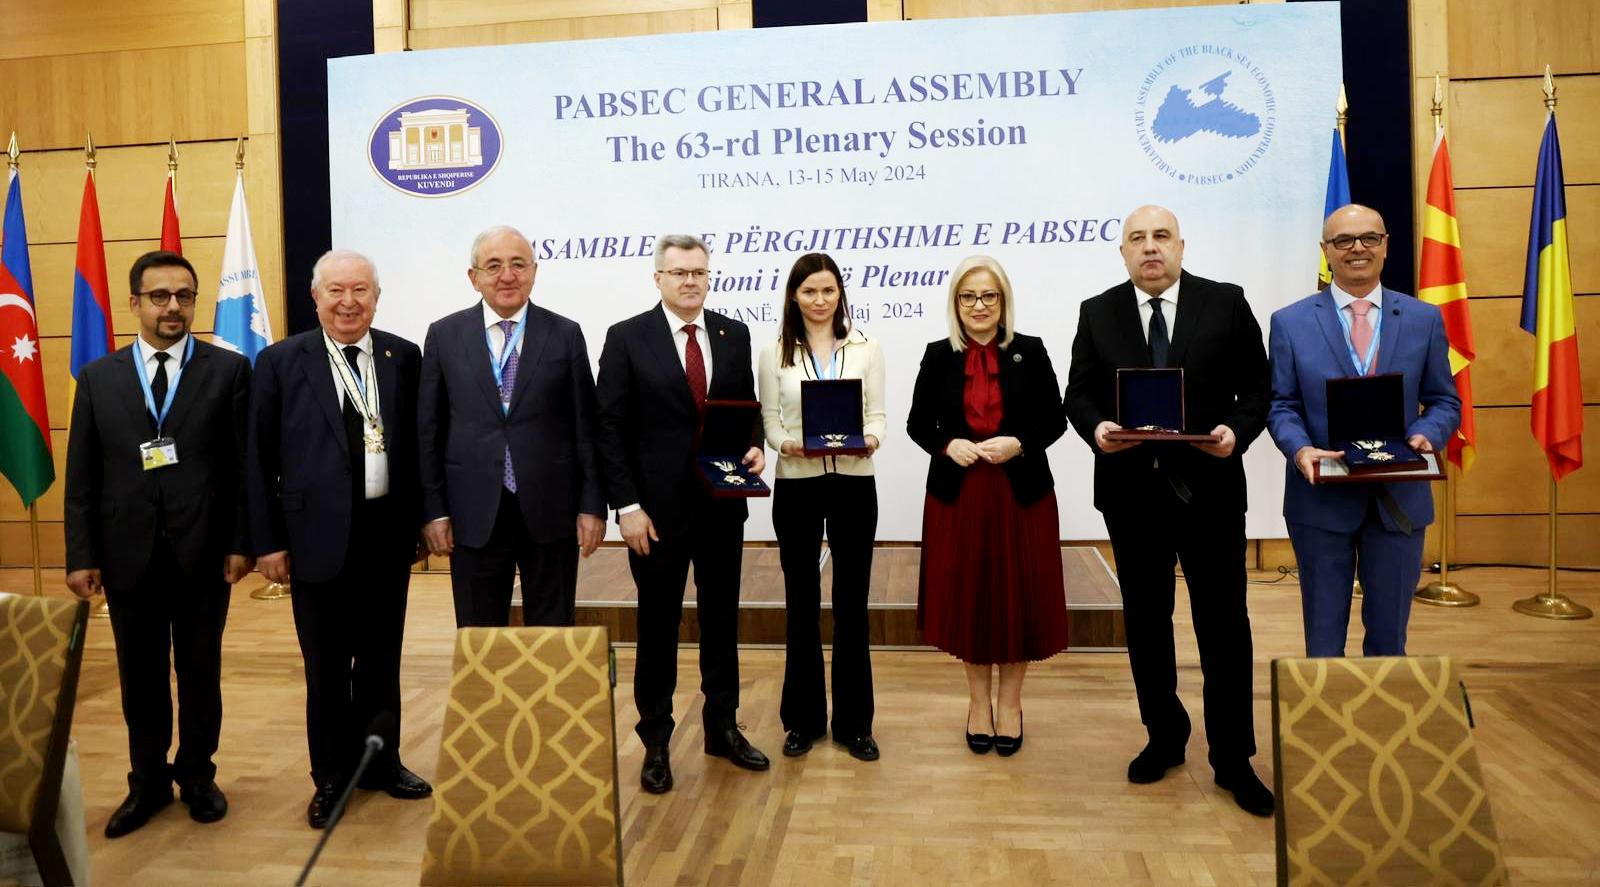 PABSEC Medal of Honour for Akkan Suver by the President of the Albanian Parliament Nikolla